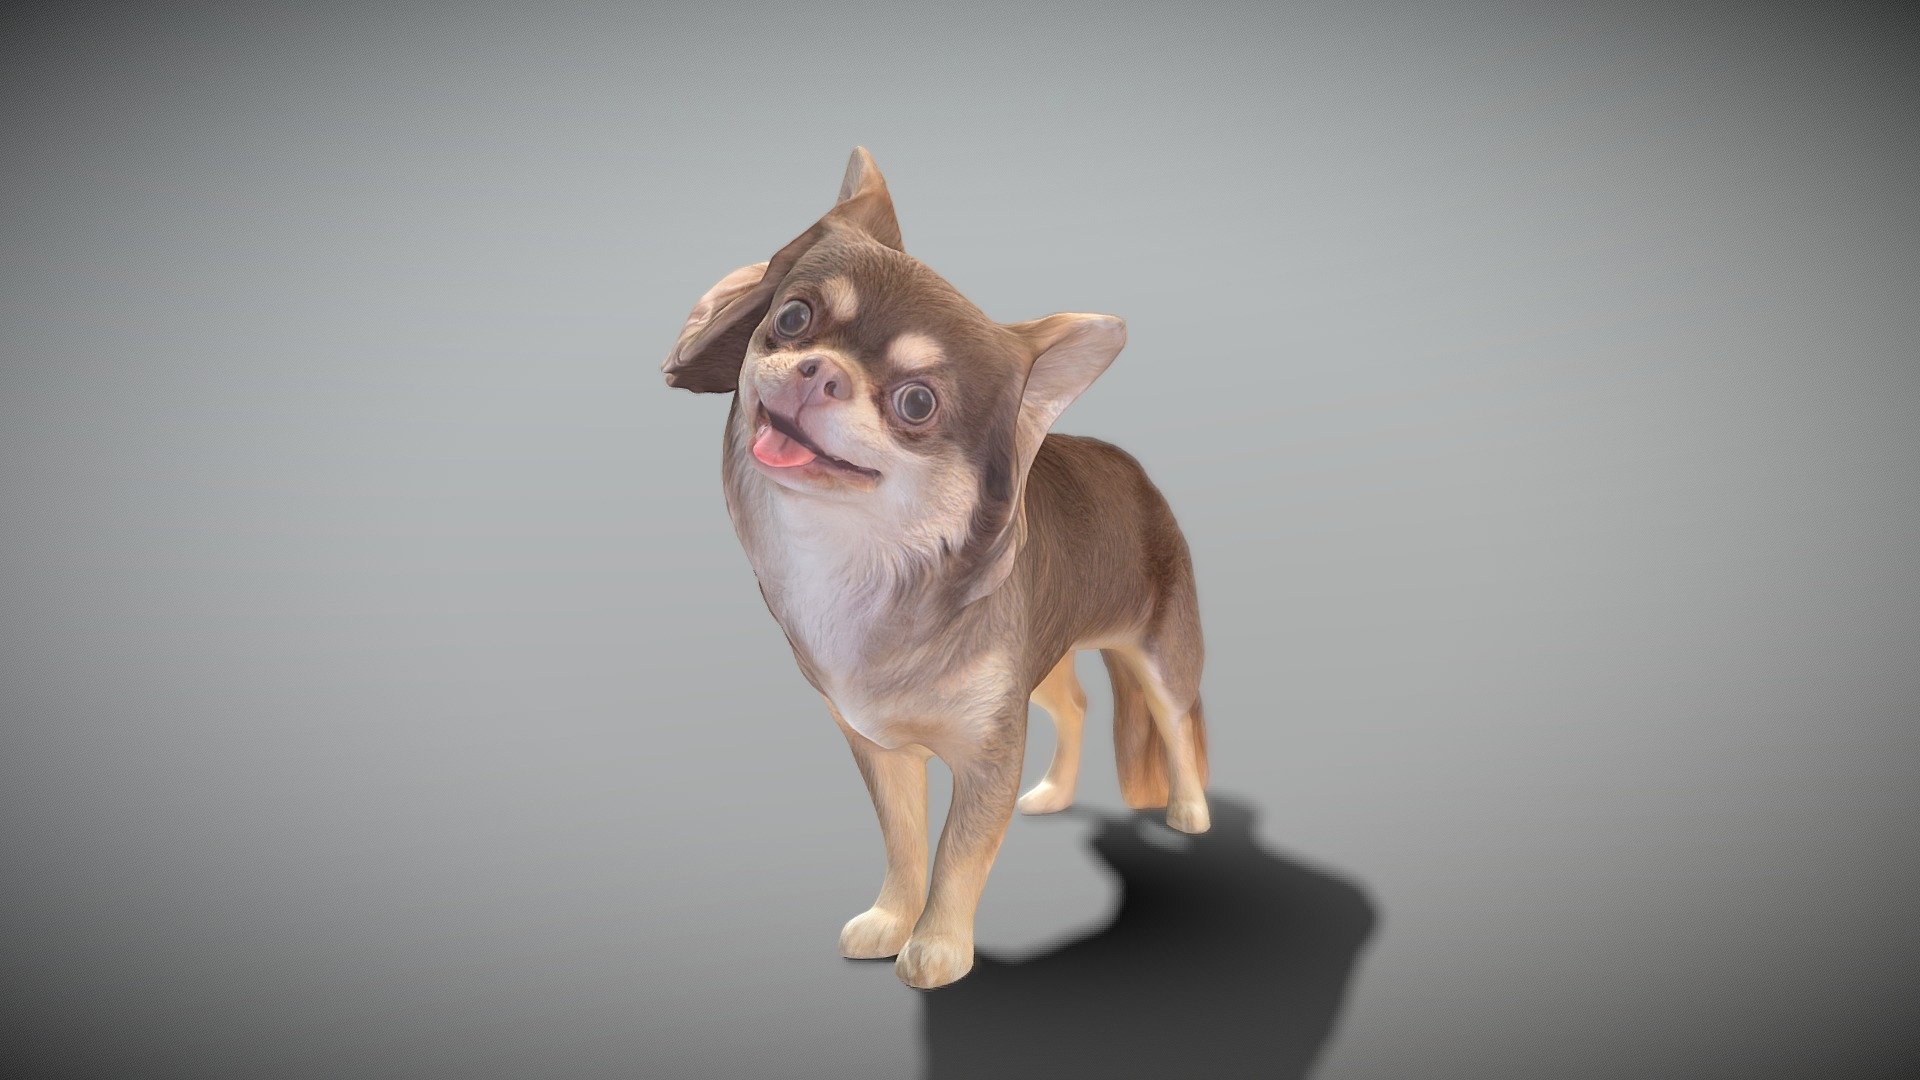 This is a true sized and highly detailed model of a young charming Сhihuahua dog. It will add life and coziness to any architectural visualisation of houses, playgrounds, parques, urban landscapes, etc. 

The product is ready both for immediate use in architectural visualisations, or further render and detailed sculpting in Zbrush.

Technical specifications:




digital double 3d scan model

150k &amp; 30k triangles | double triangulated

high-poly model (.ztl tool with 5 subdivisions) clean and retopologized automatically via ZRemesher

sufficiently clean

PBR textures 8K resolution: Diffuse, Normal, Specular maps

non-overlapping UV map

no extra plugins are required for this model

Download package includes a Cinema 4D project file with Redshift shader, OBJ, FBX, STL files, which are applicable for 3ds Max, Maya, Unreal Engine, Unity, Blender, etc. All the textures you will find in the “Tex” folder, included into the main archive.

3D EVERYTHING

Stand with Ukraine! - Funny dog 29 - Buy Royalty Free 3D model by deep3dstudio 3d model